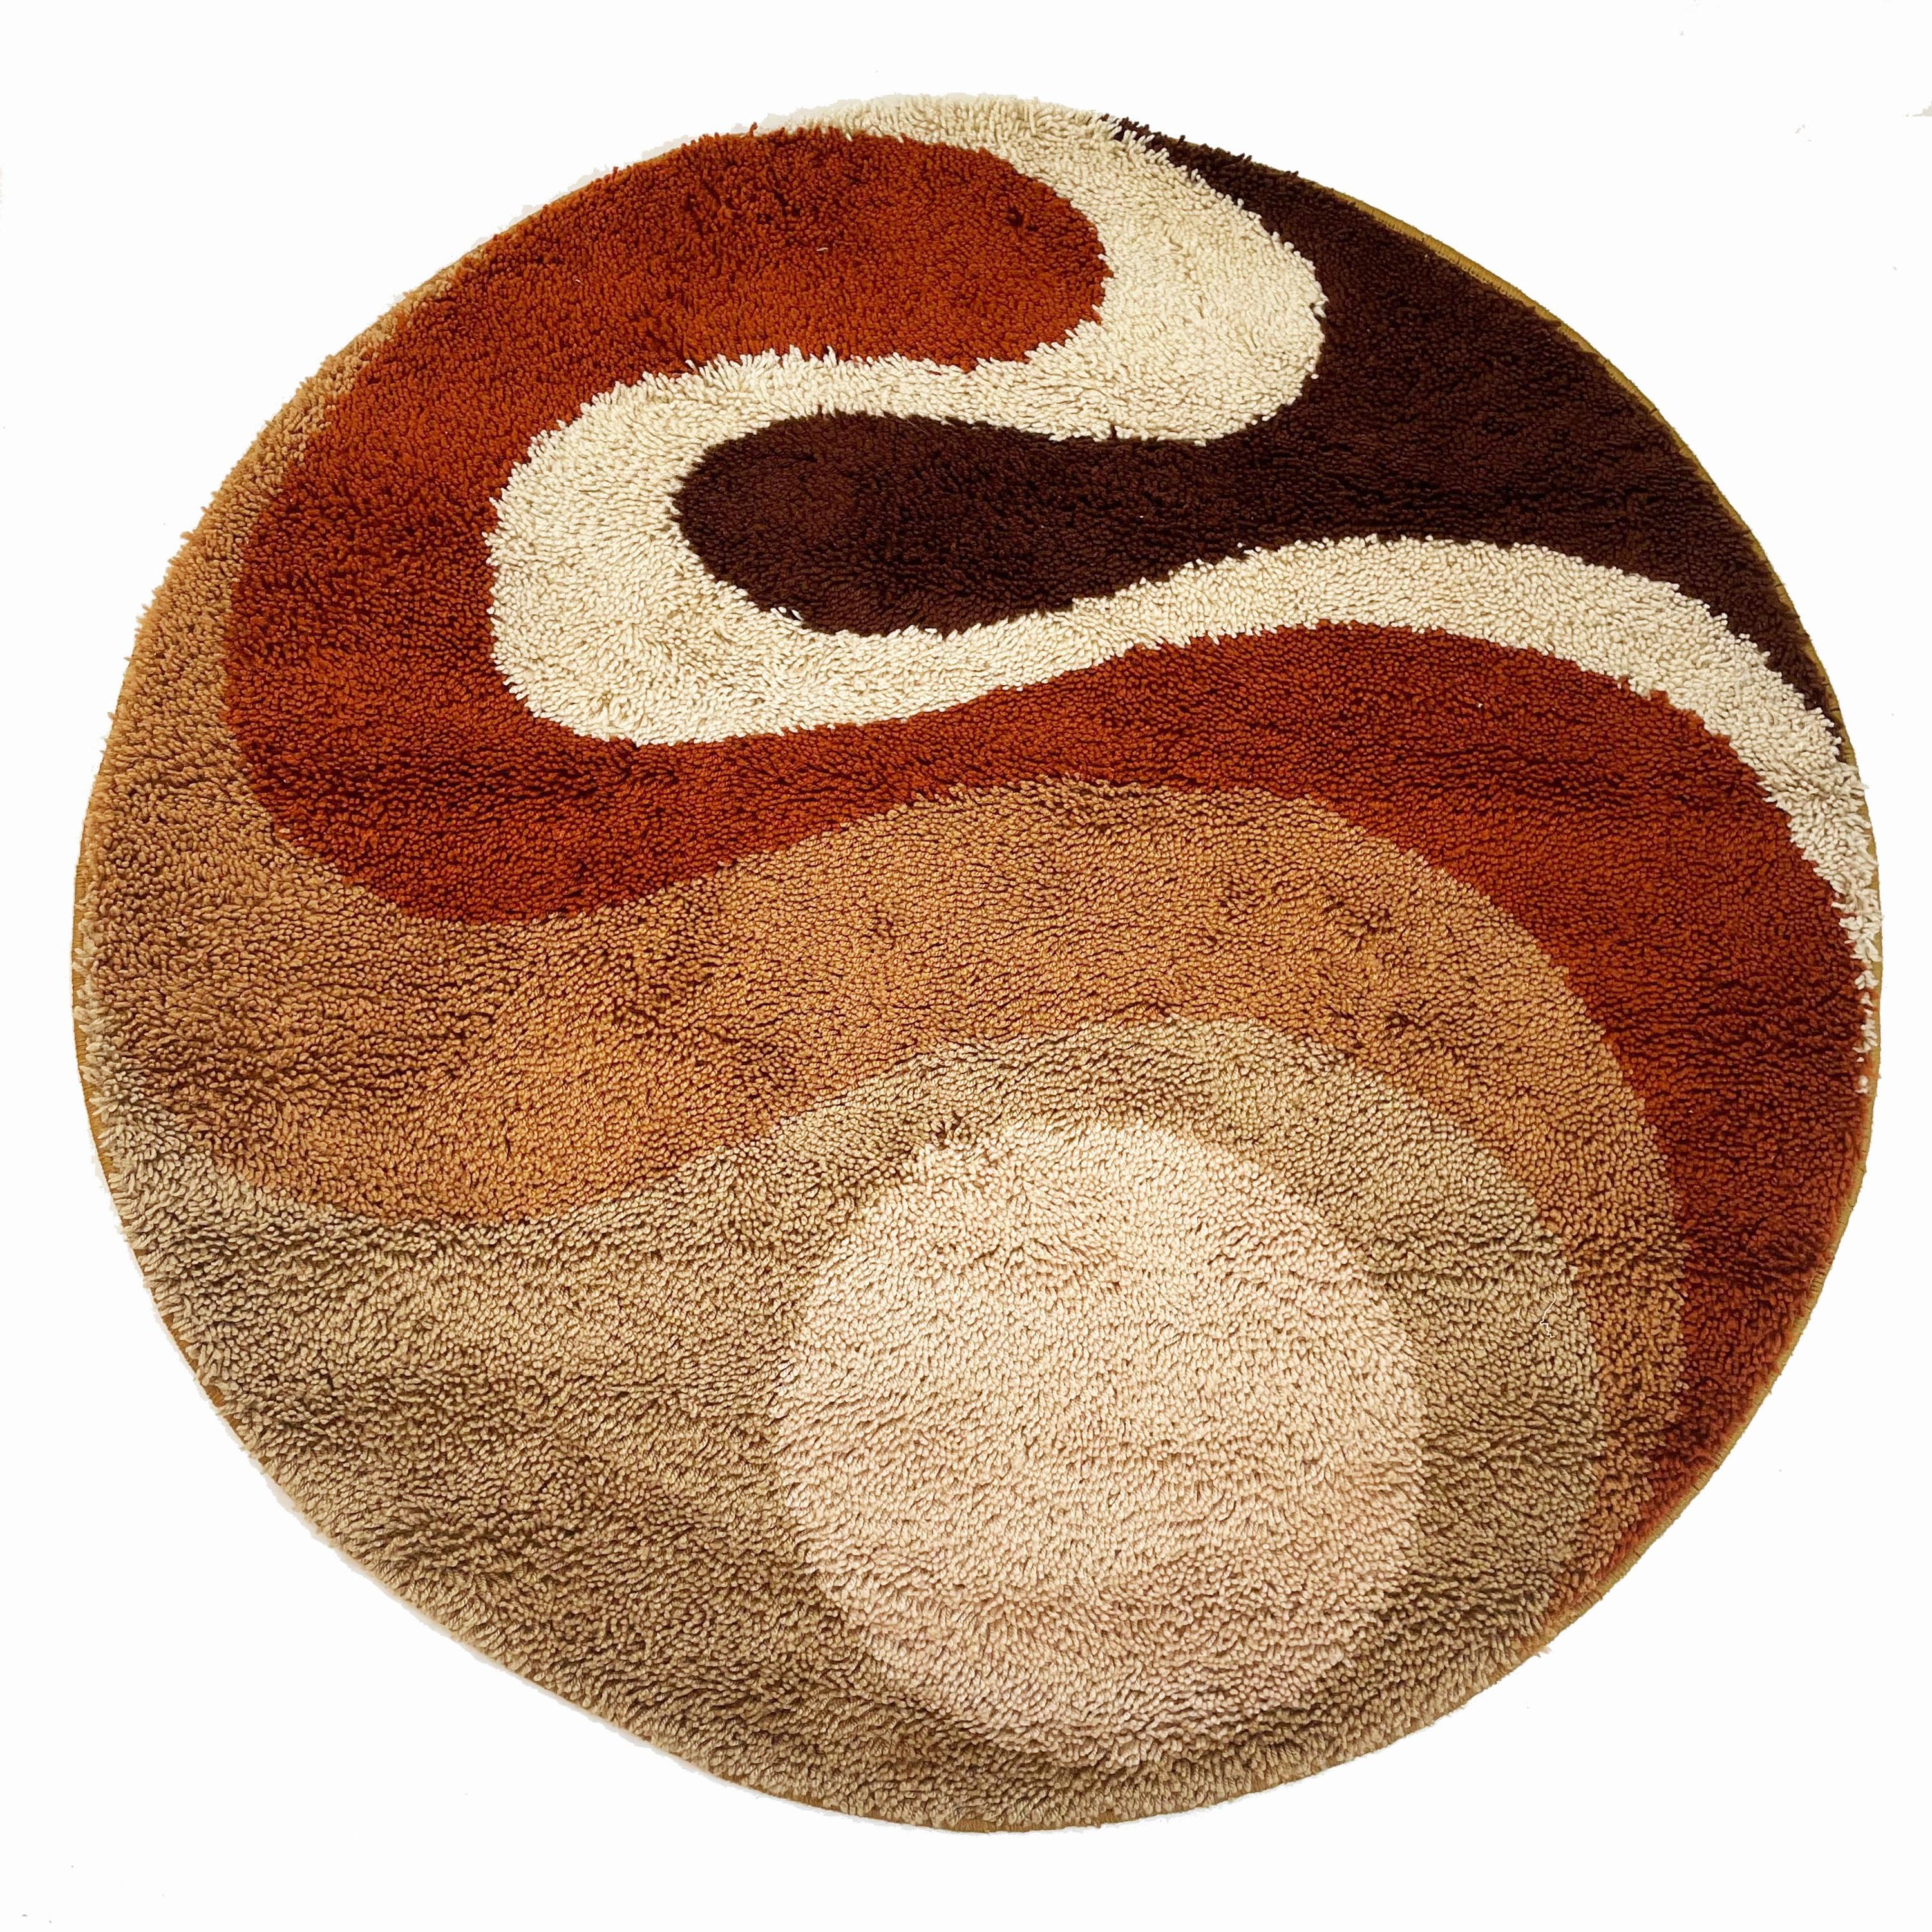 Small Psychedilic 1970s High Pile Rug by Prinstapijt Desso, Netherlands No 1